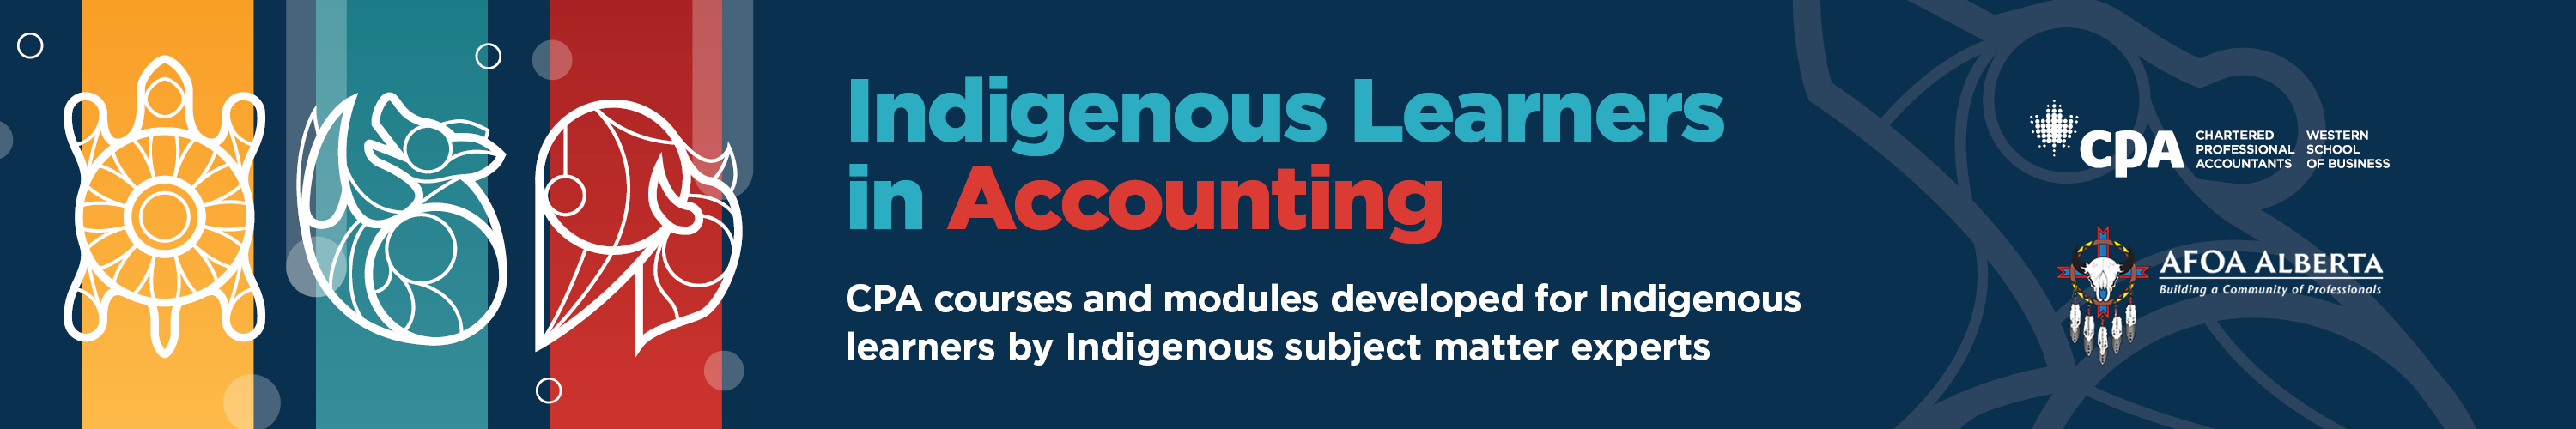 Indigenous Learners in Accounting (ILA)